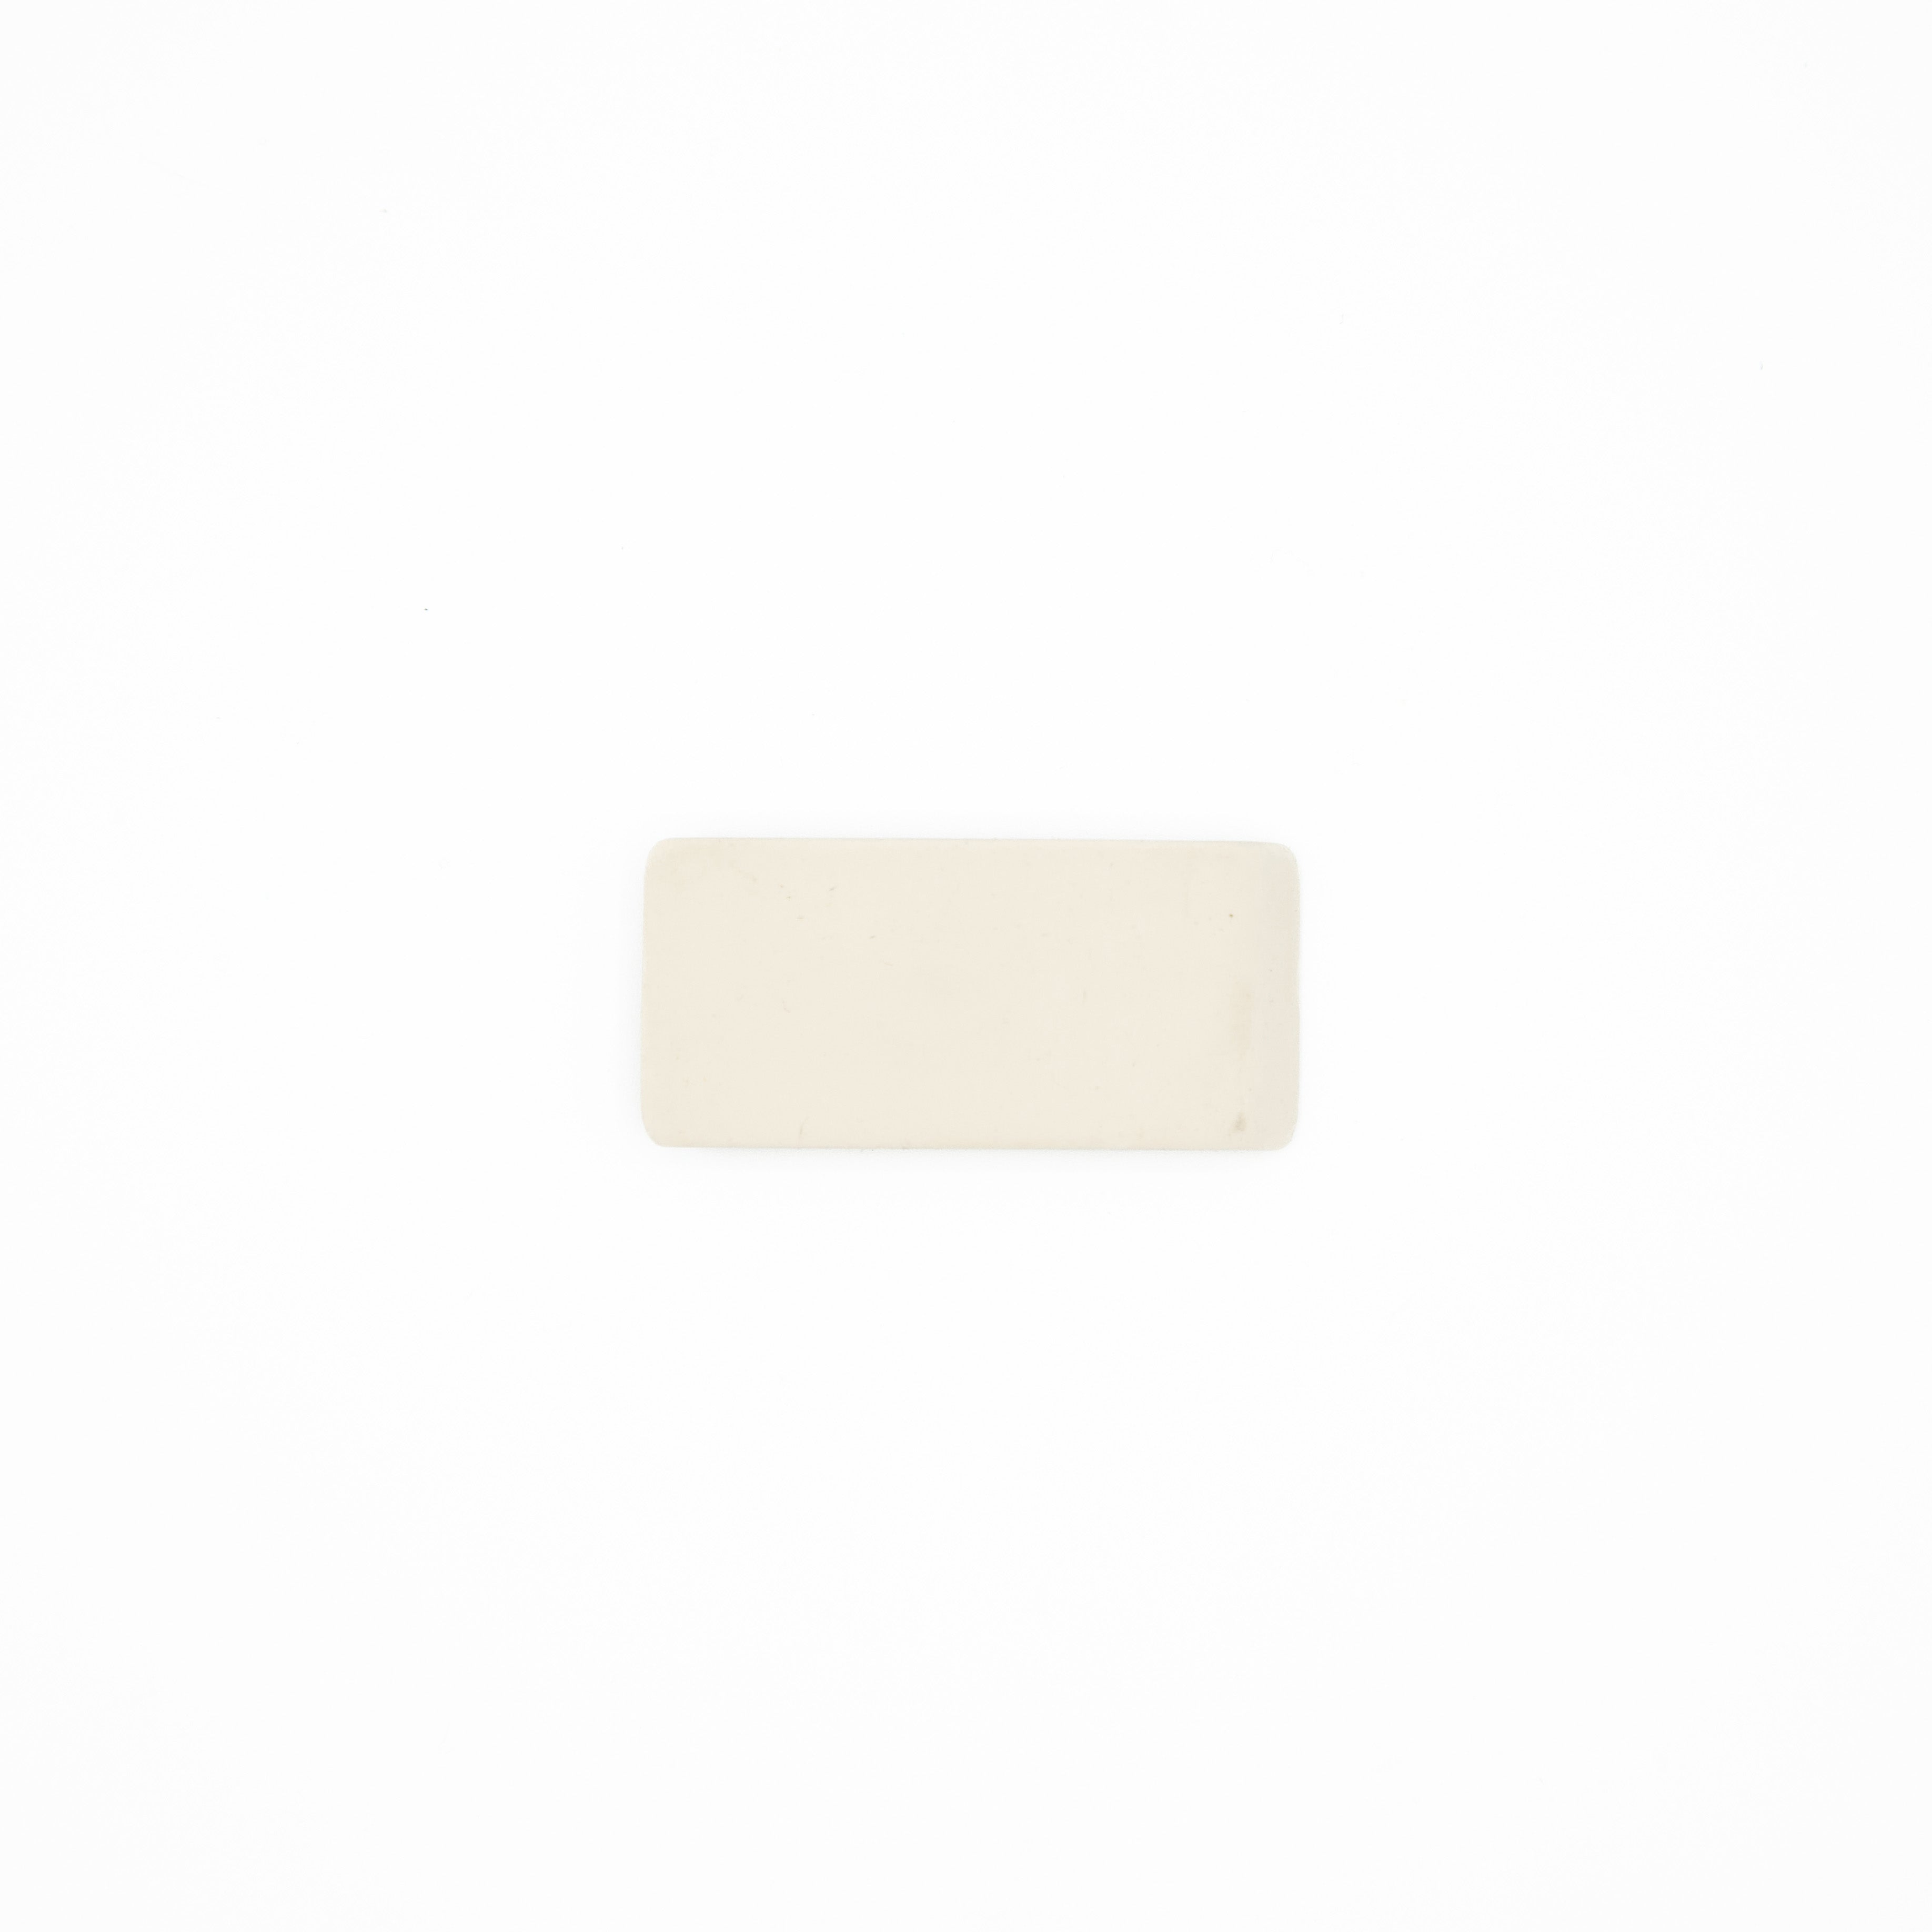 Musgrave-themed White Erasers - Eraser Pack of 10